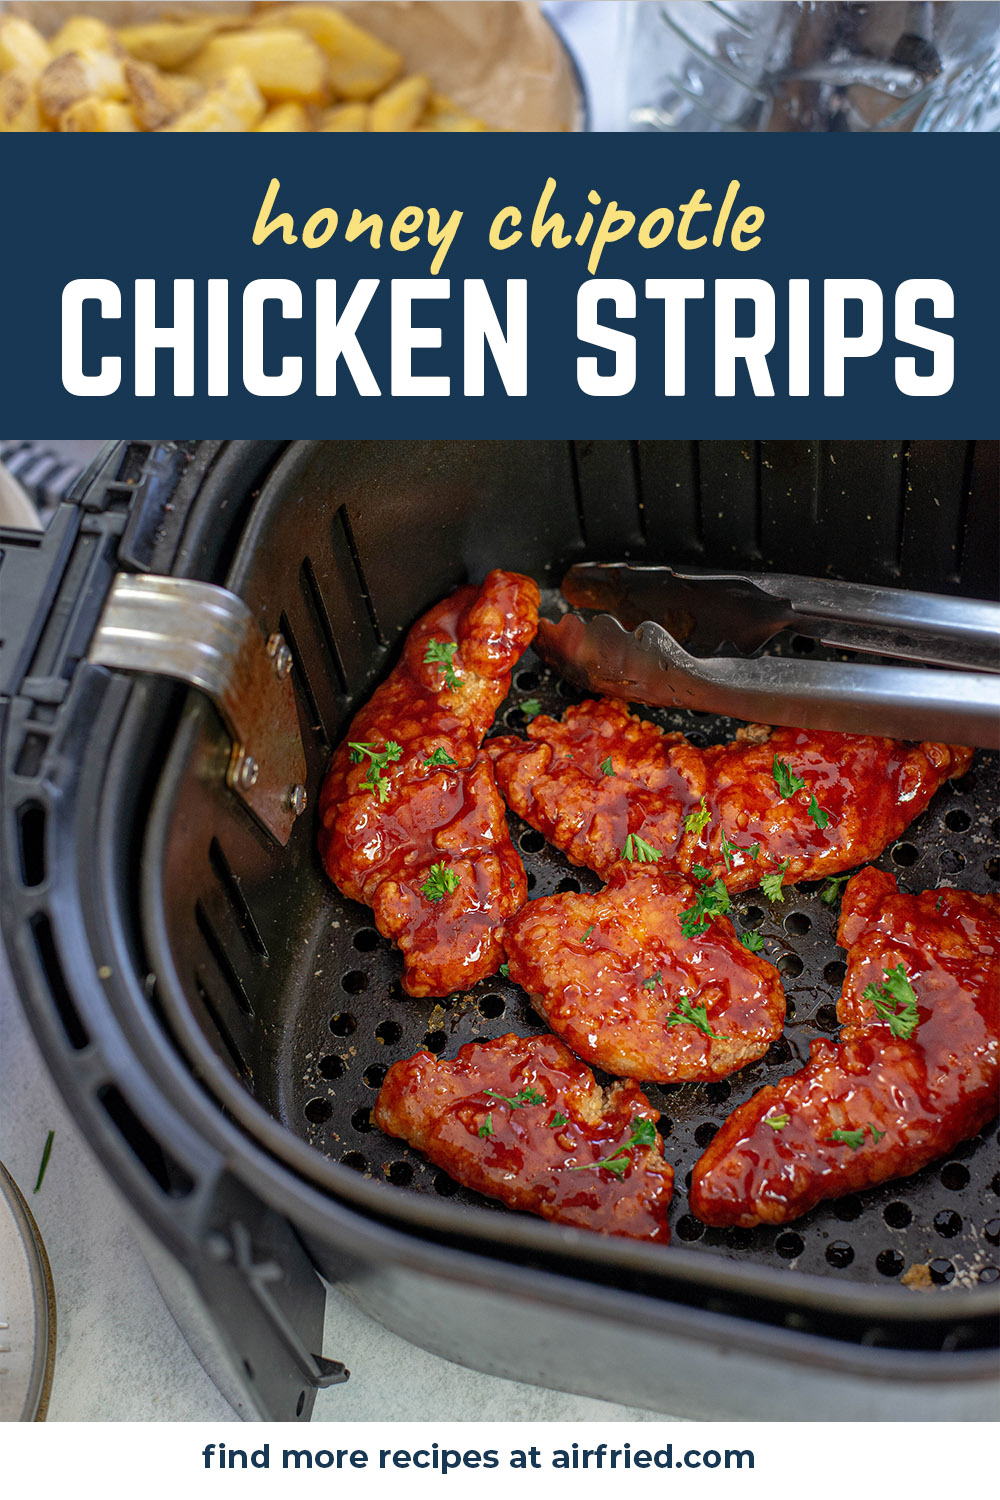 Sweet and spicy chicken strips are coated in a homemade honey chipotle sauce!